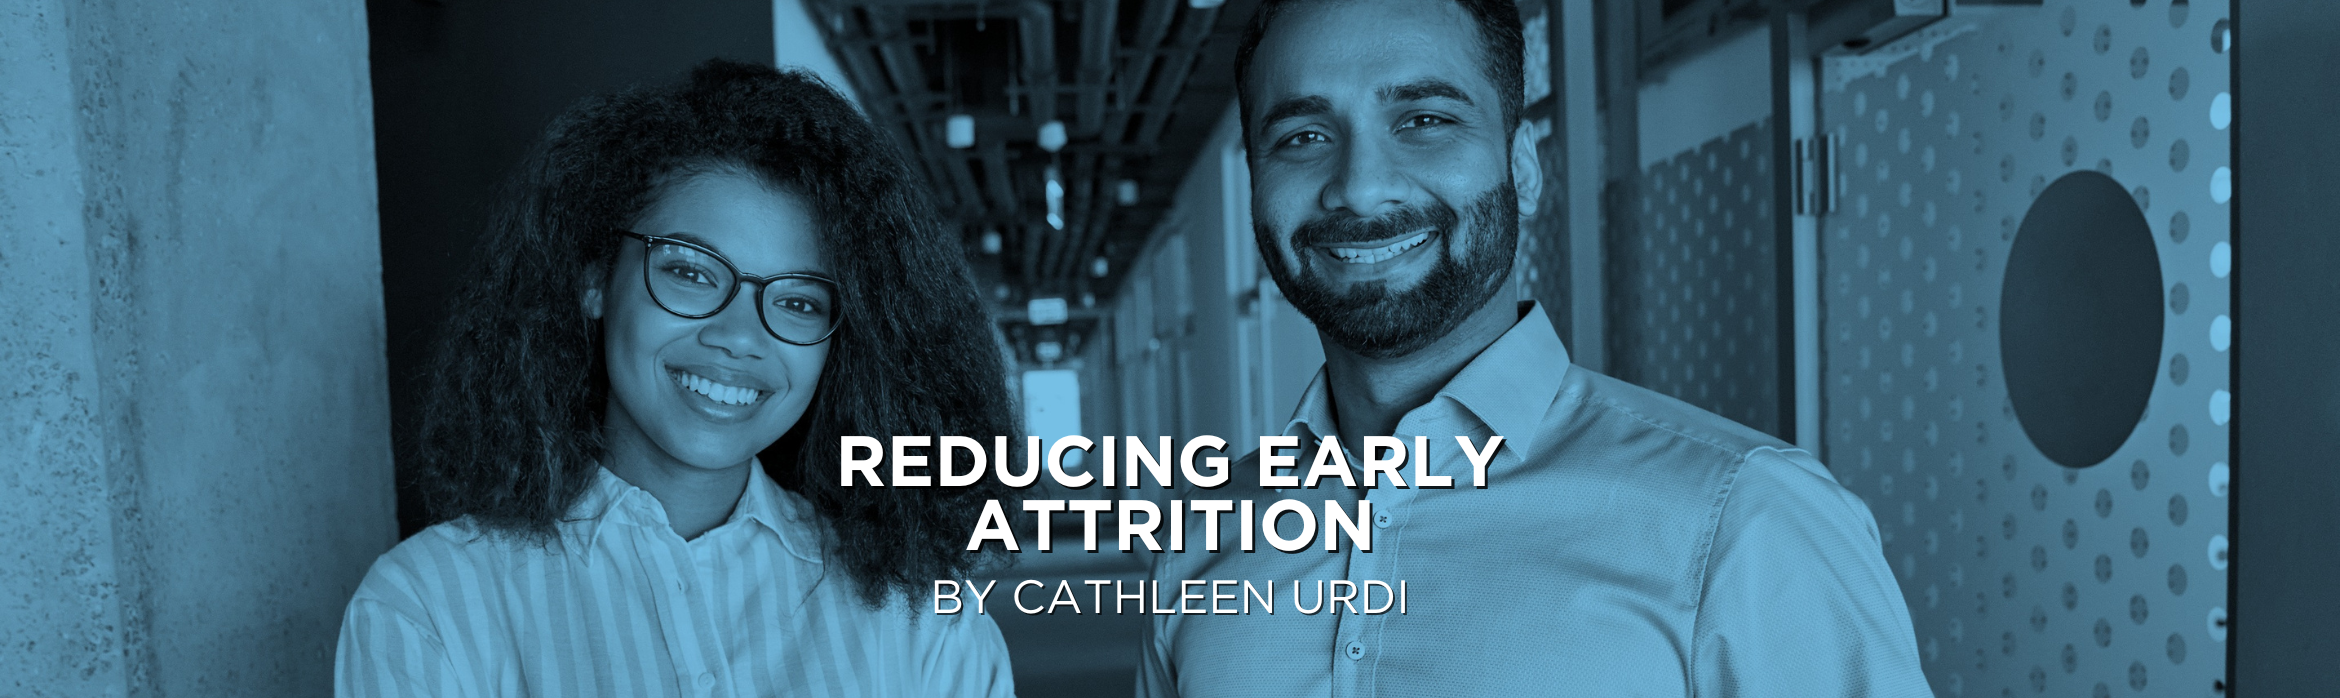 Reducing Early Attrition